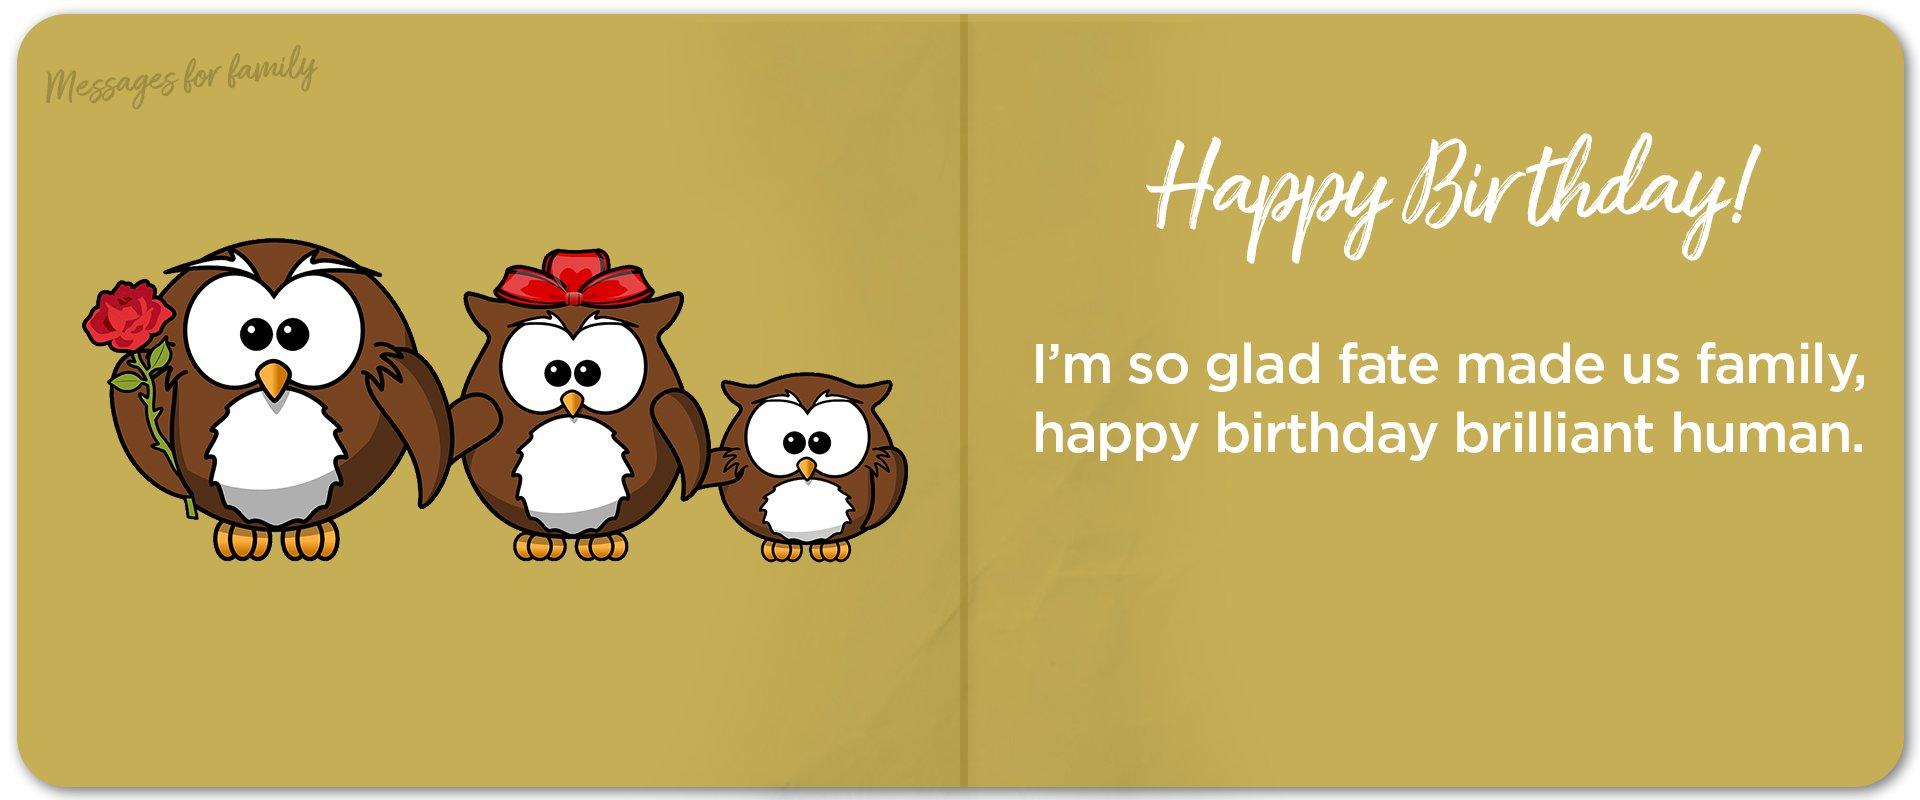 Belated Happy Birthday: Happy Late Birthday Wishes Gift Blank Lined Journal  (Messages, Greetings, Presents, Cards) : Publishing, Gary E Smith:  Amazon.sg: Books